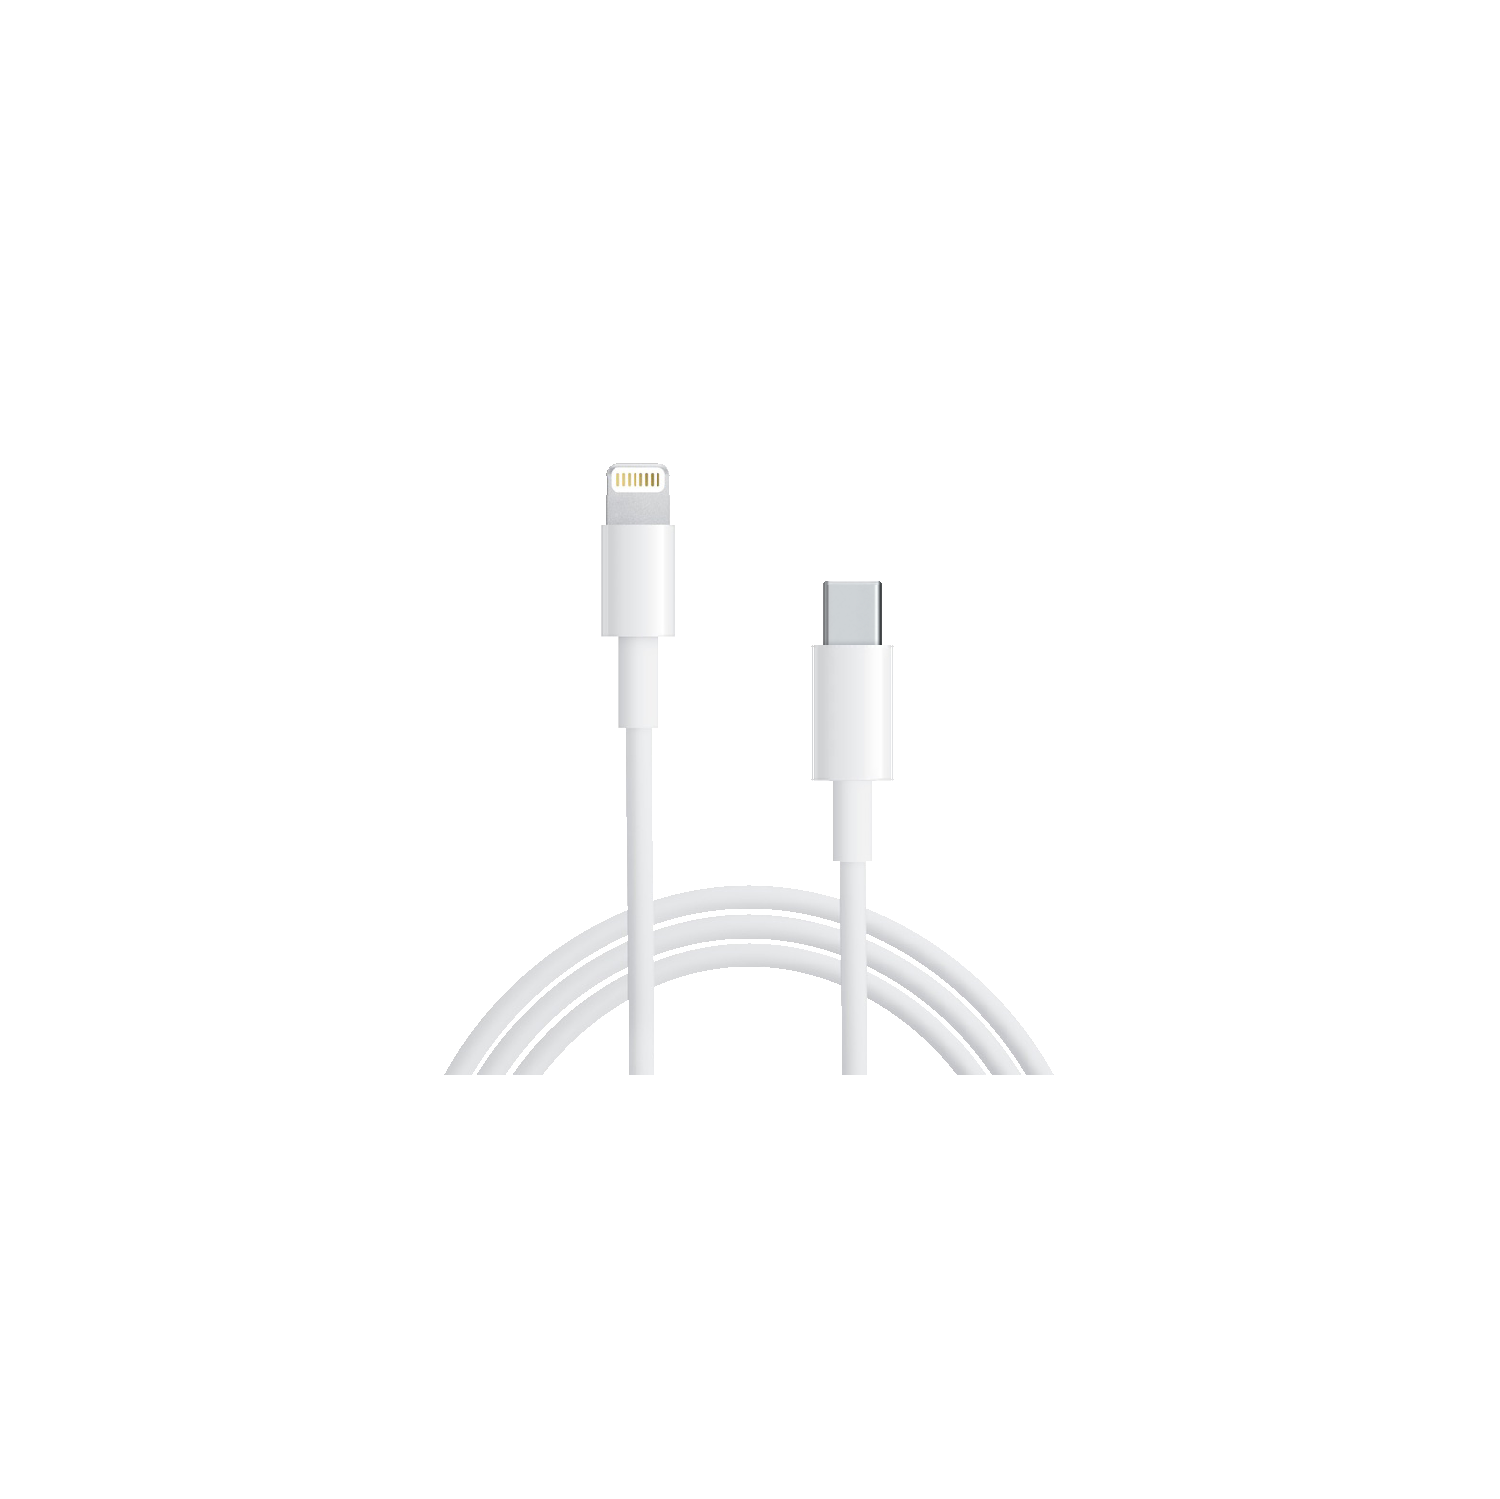 USB 3.1 Type C to Lightning Data Sync & Fast Charging Cable for iPhone / iPad / iPod